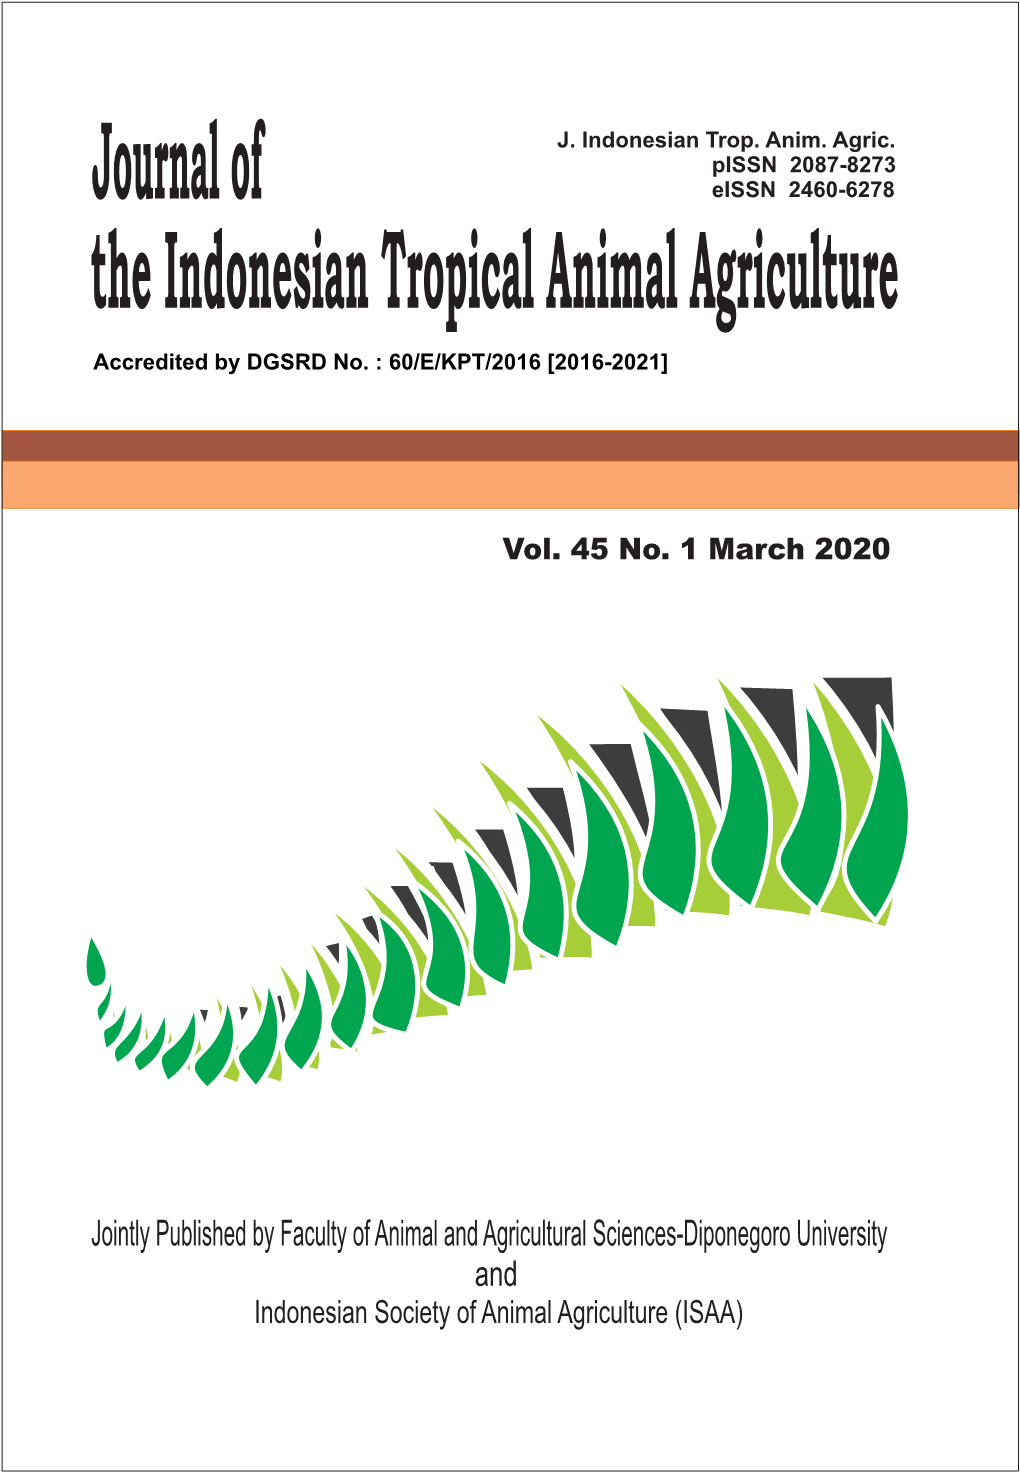 Jointly Published by Faculty of Animal and Agricultural Sciences-Diponegoro University and Indonesian Society of Animal Agriculture (ISAA)